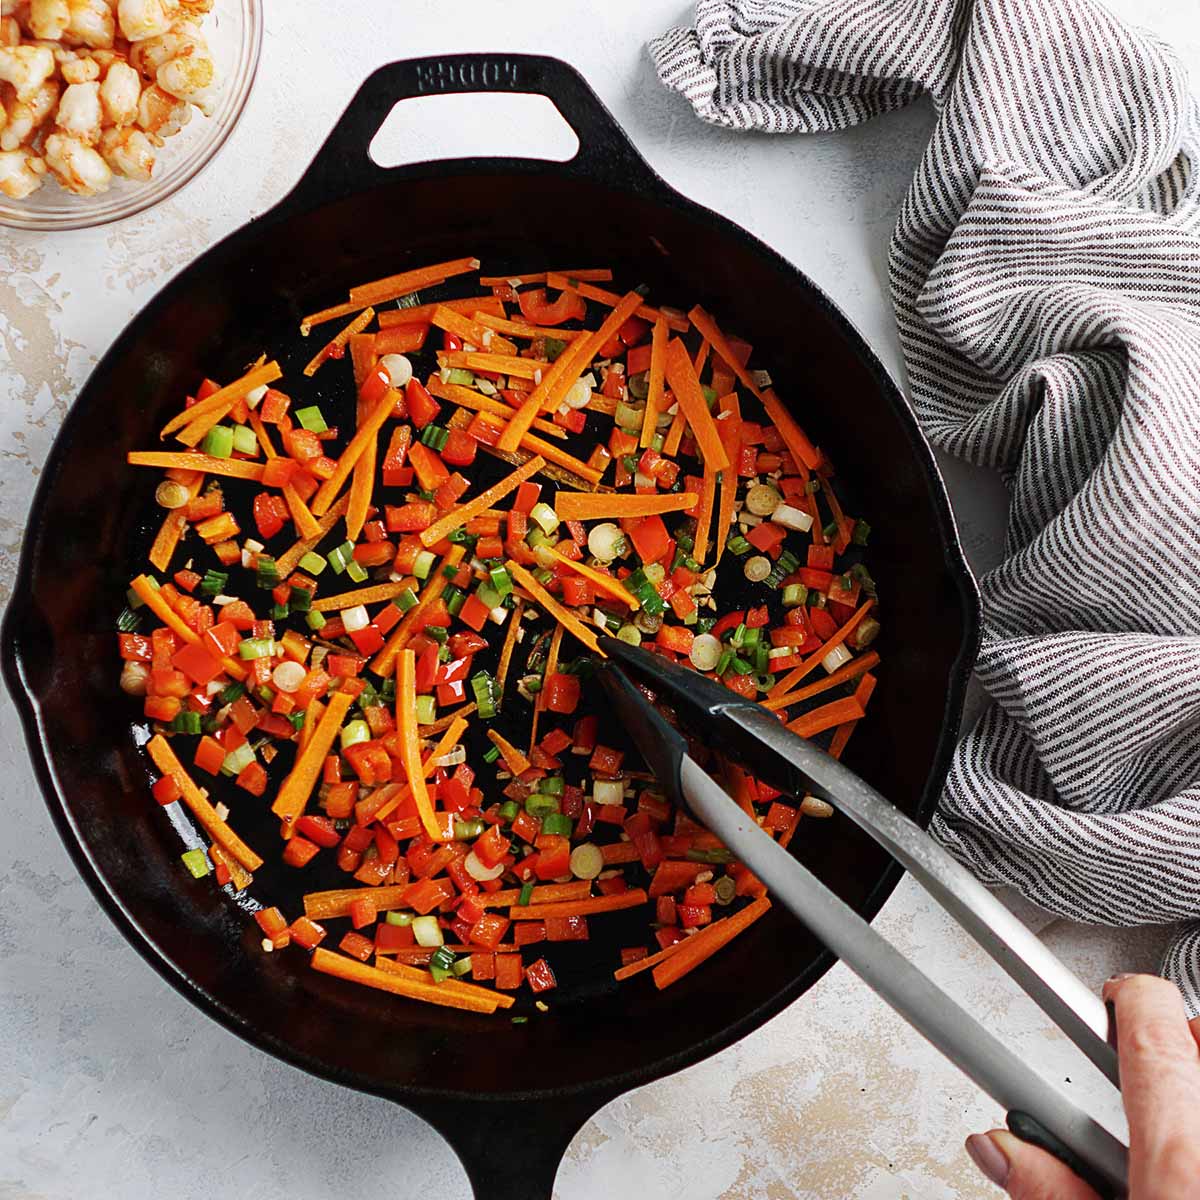 Sauteing vegetables in a skillet.